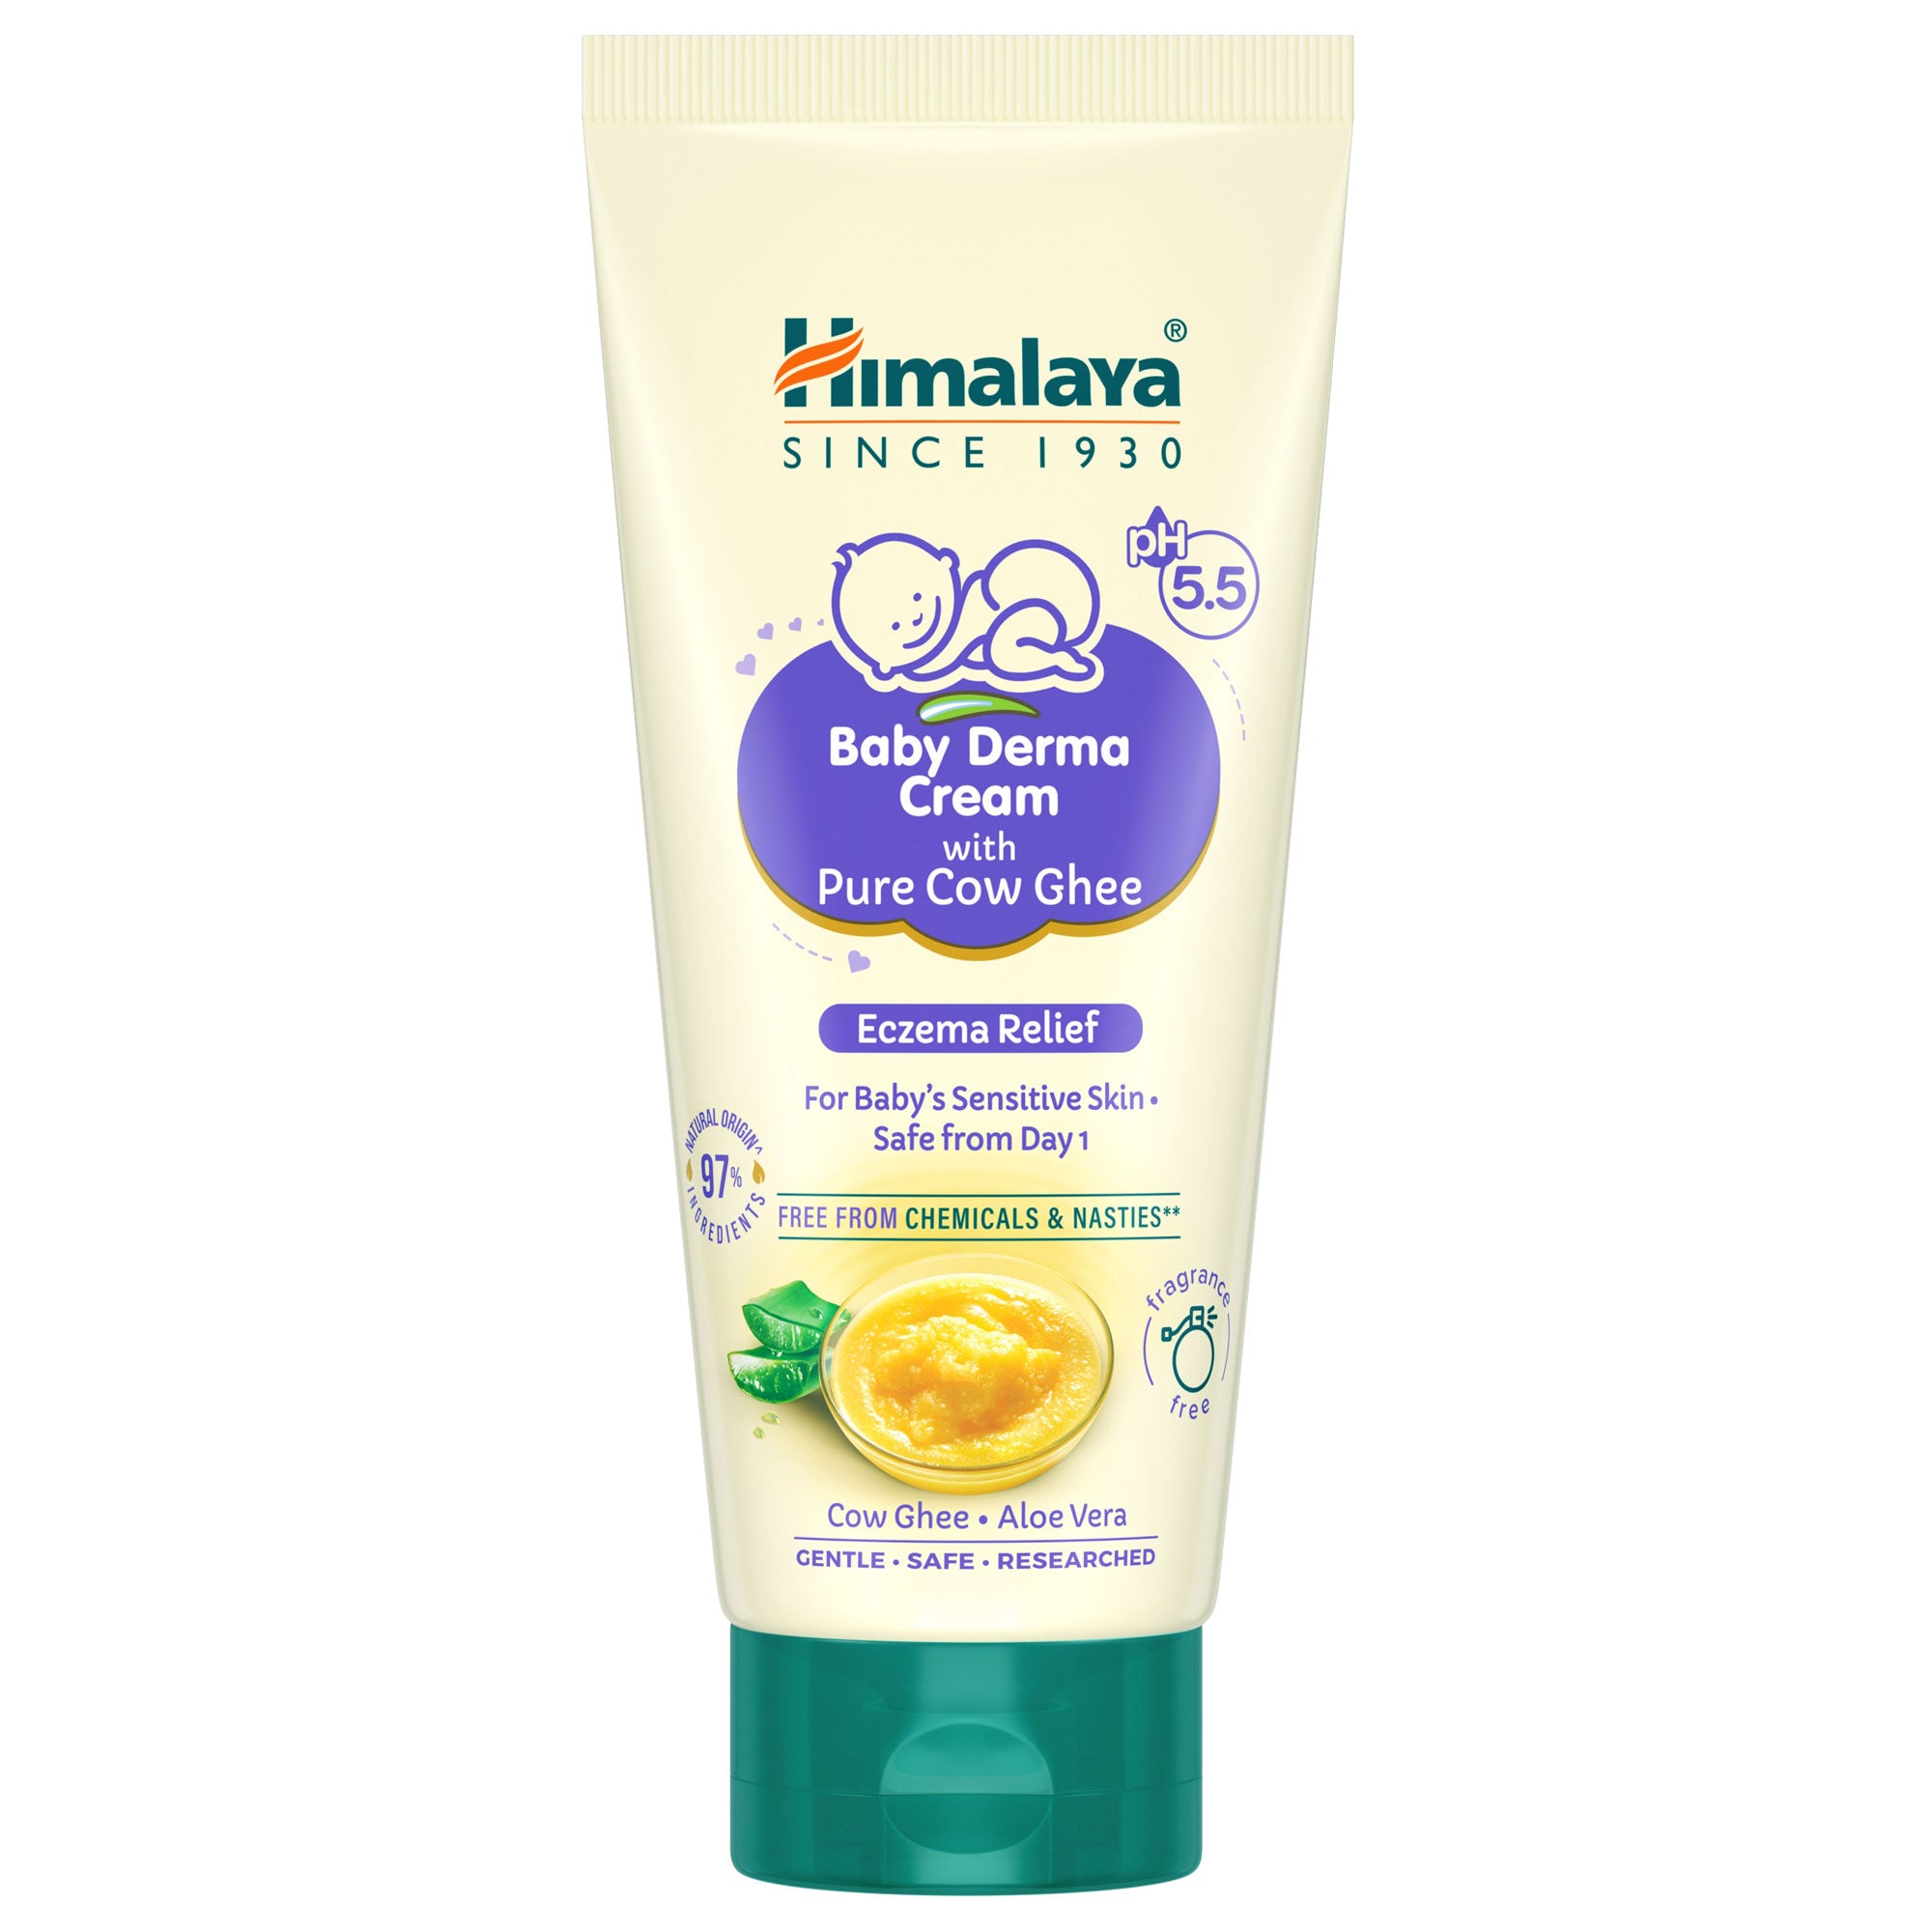 Himalaya Baby Derma Cream with Pure Cow Ghee 50g Tube Front